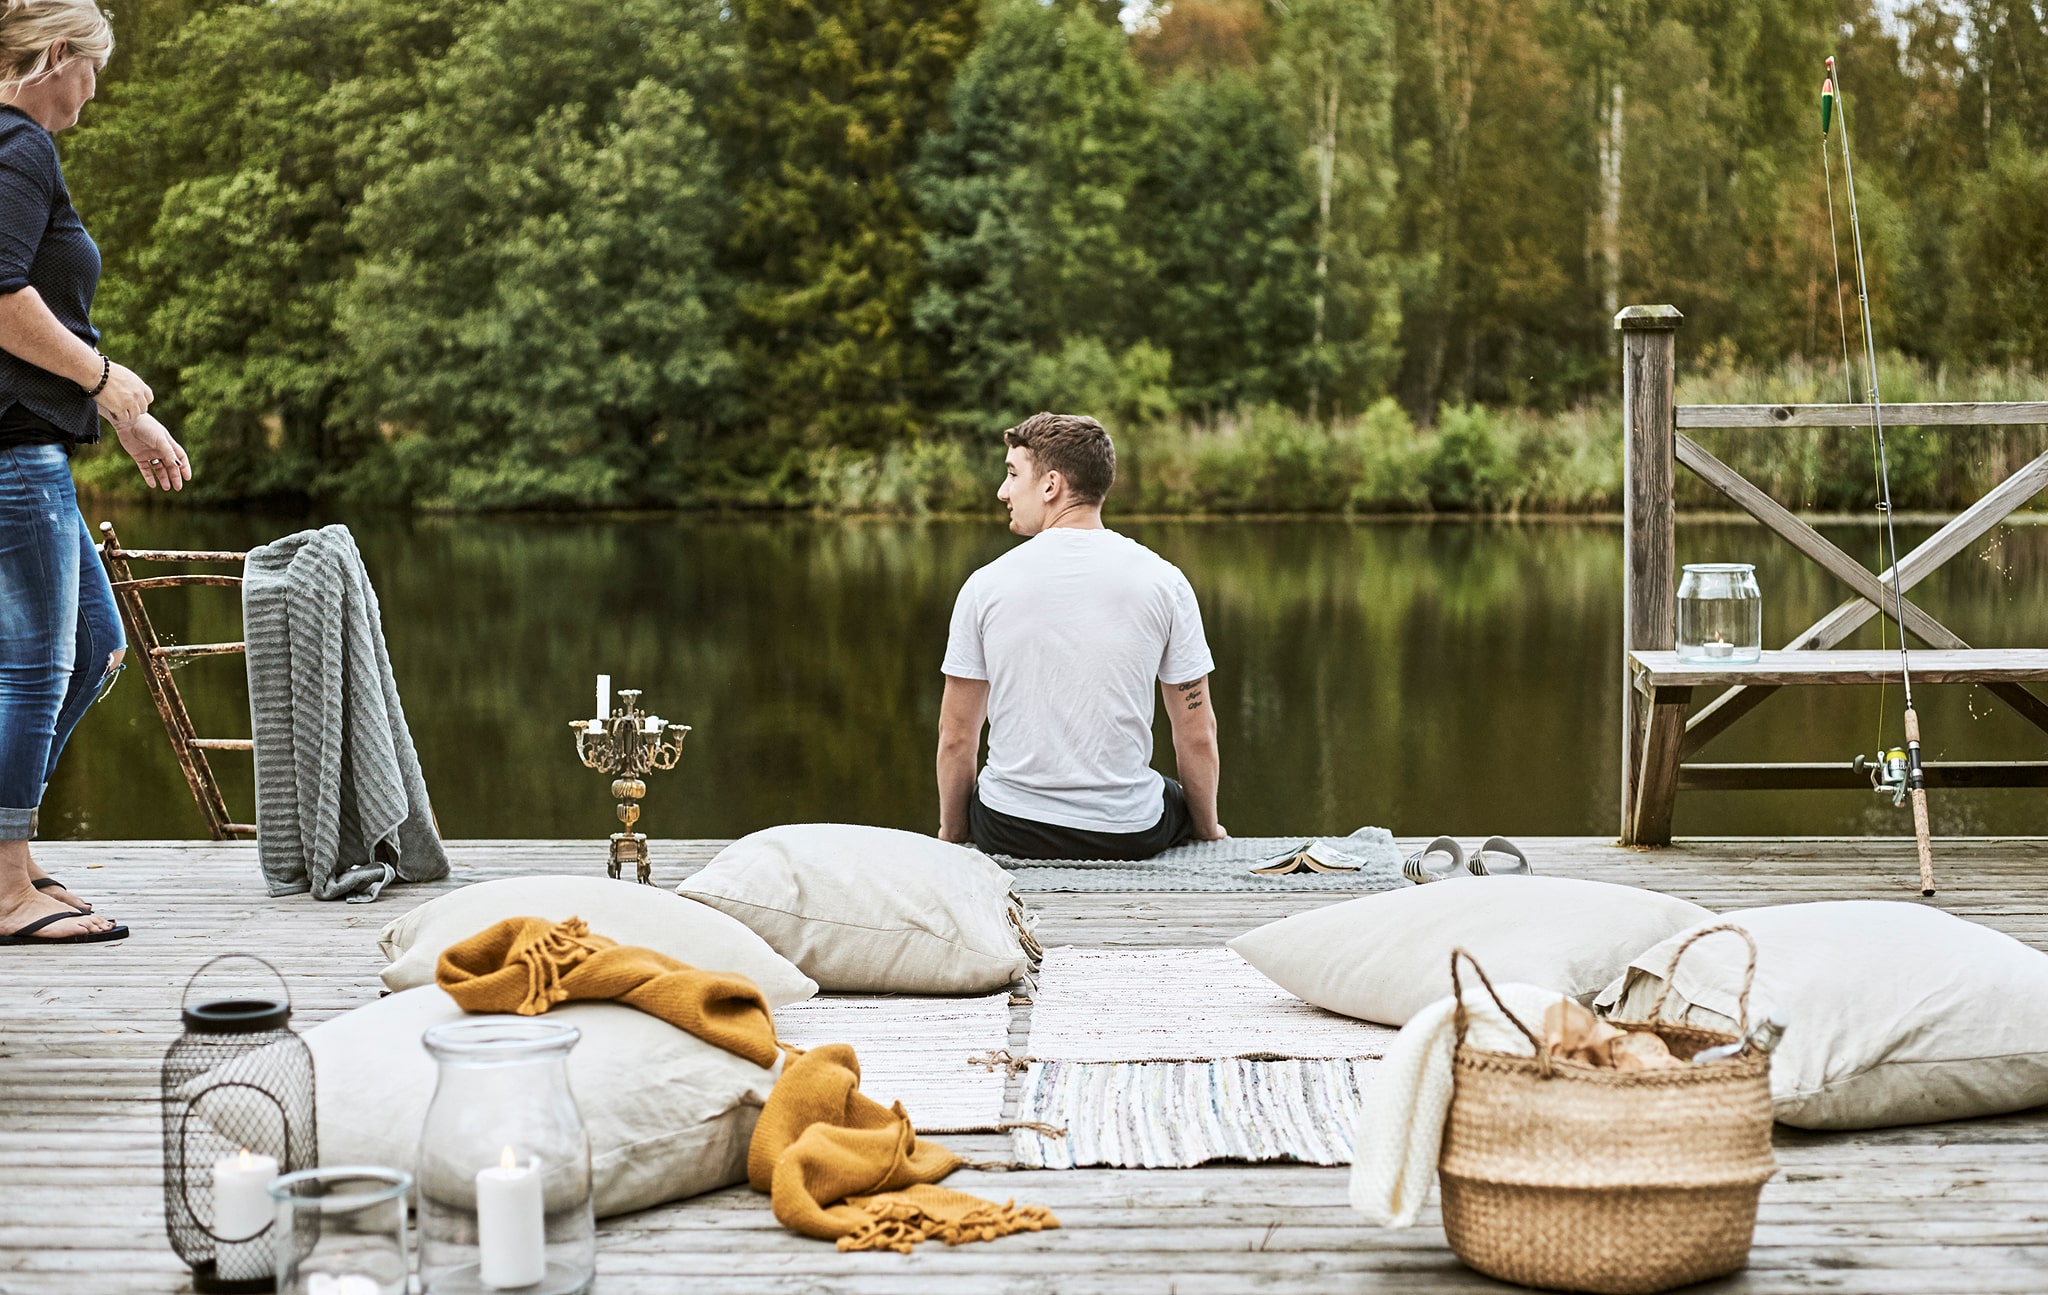 A boy sits on the edge of a jetty next to a woman in flip-flops. On the deck are rugs, cushions, throws and a picnic basket.